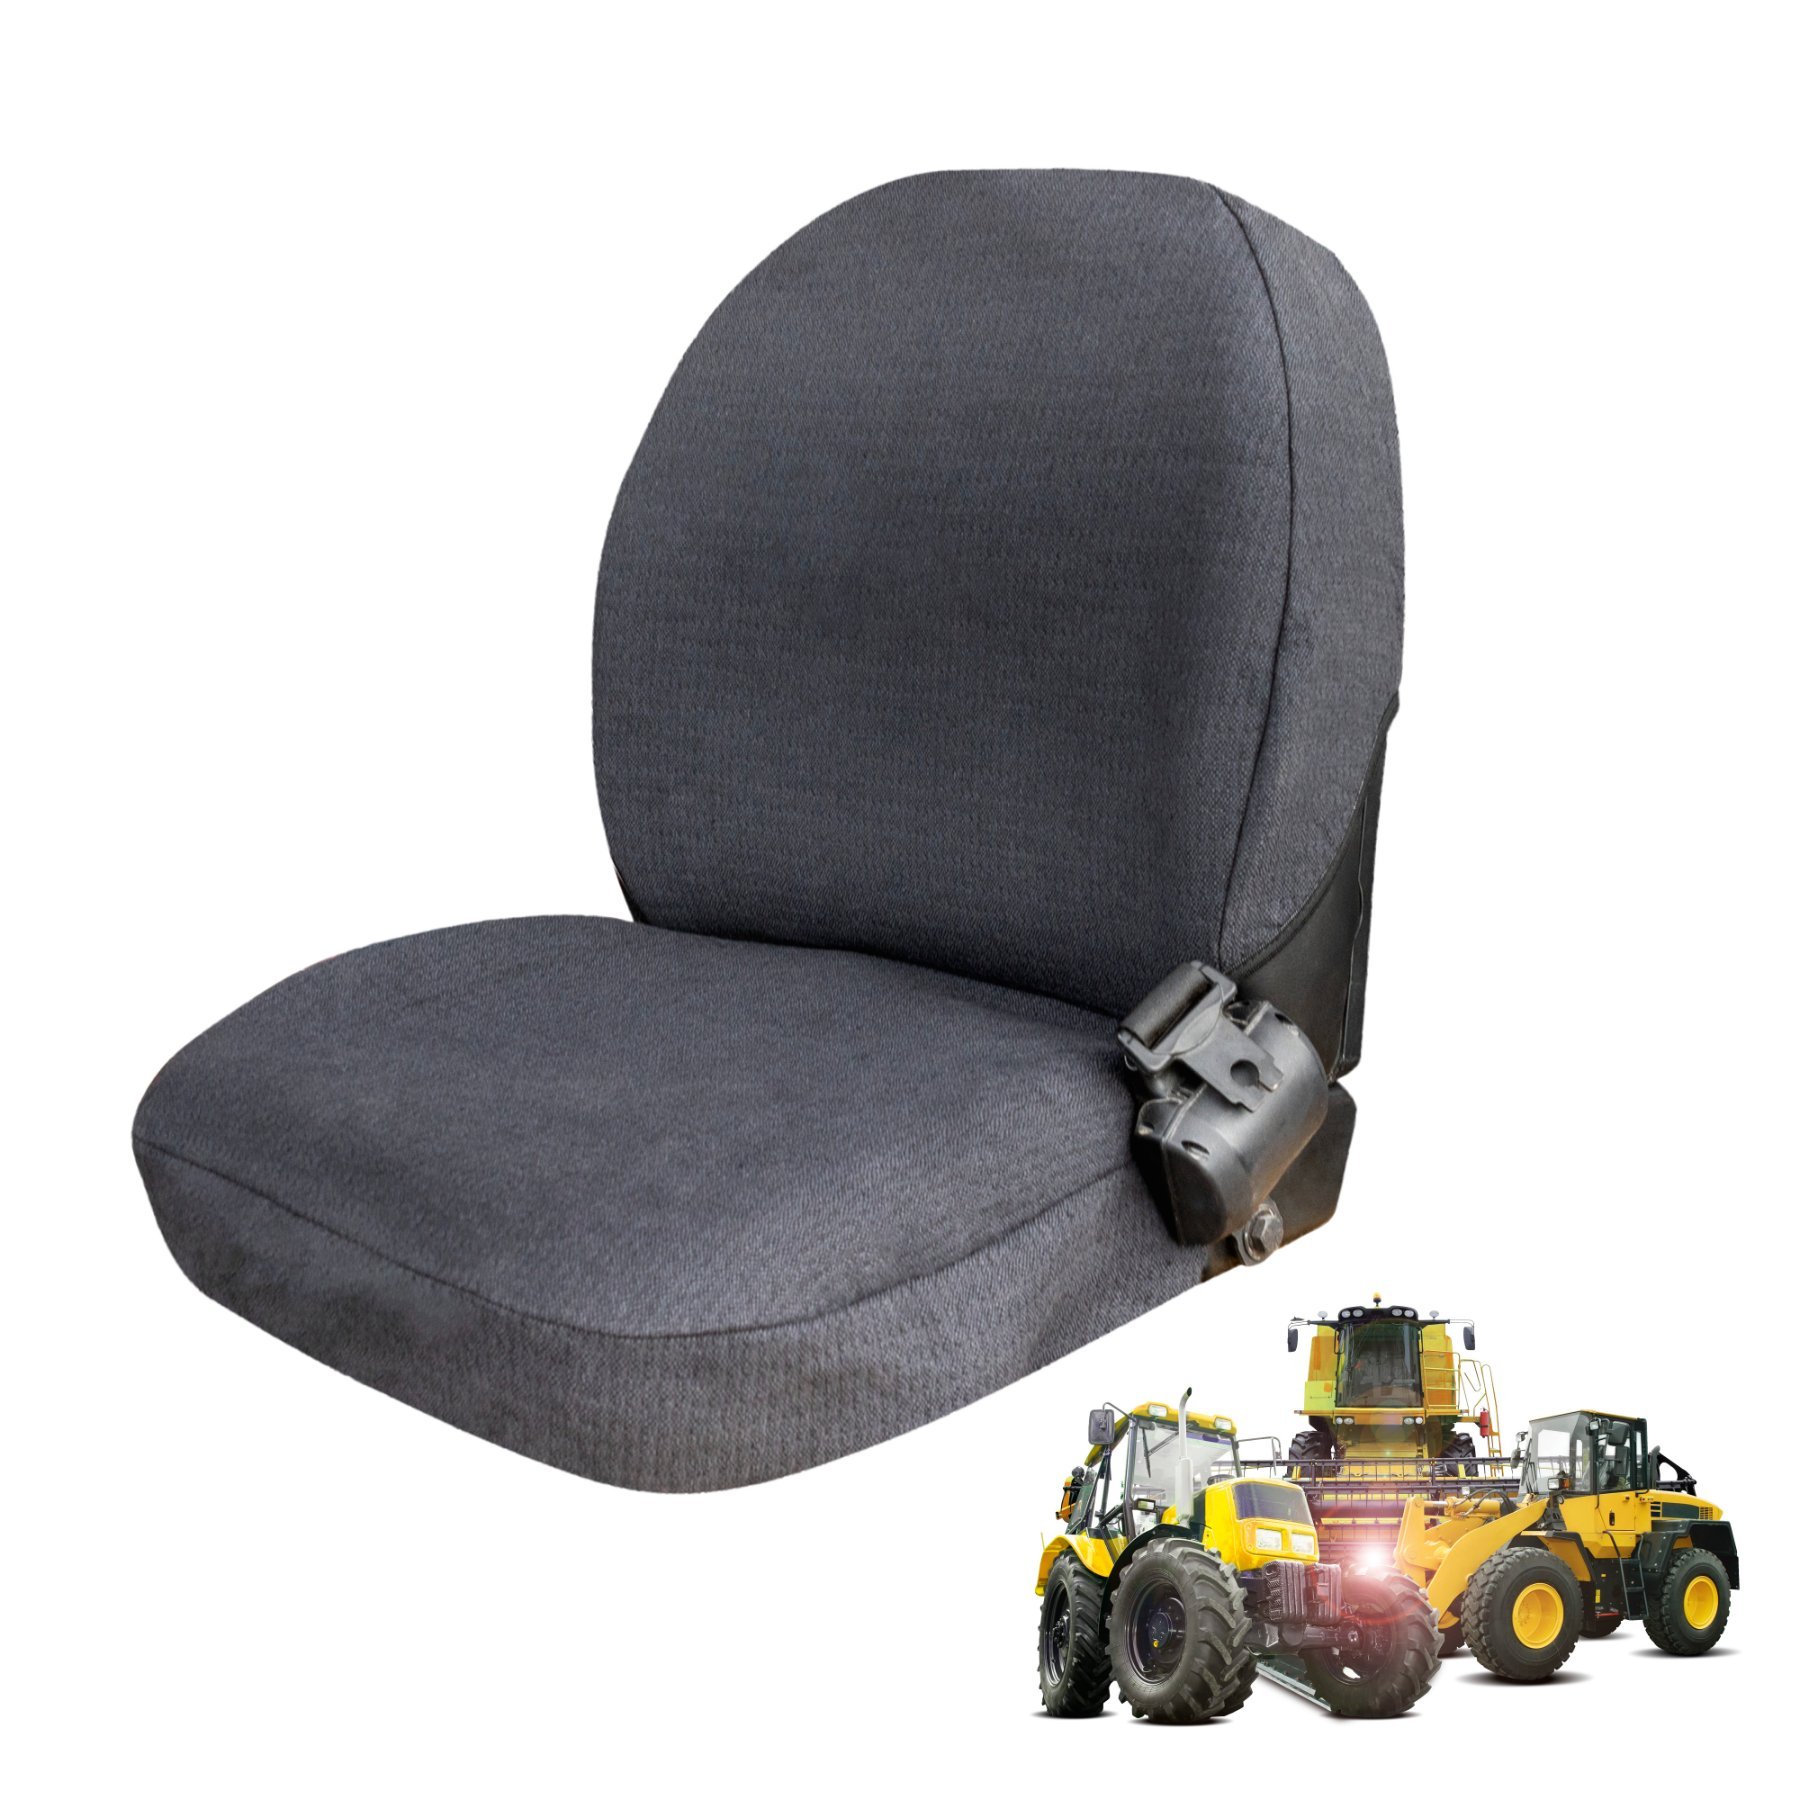 Seat cover construction machinery, size 3